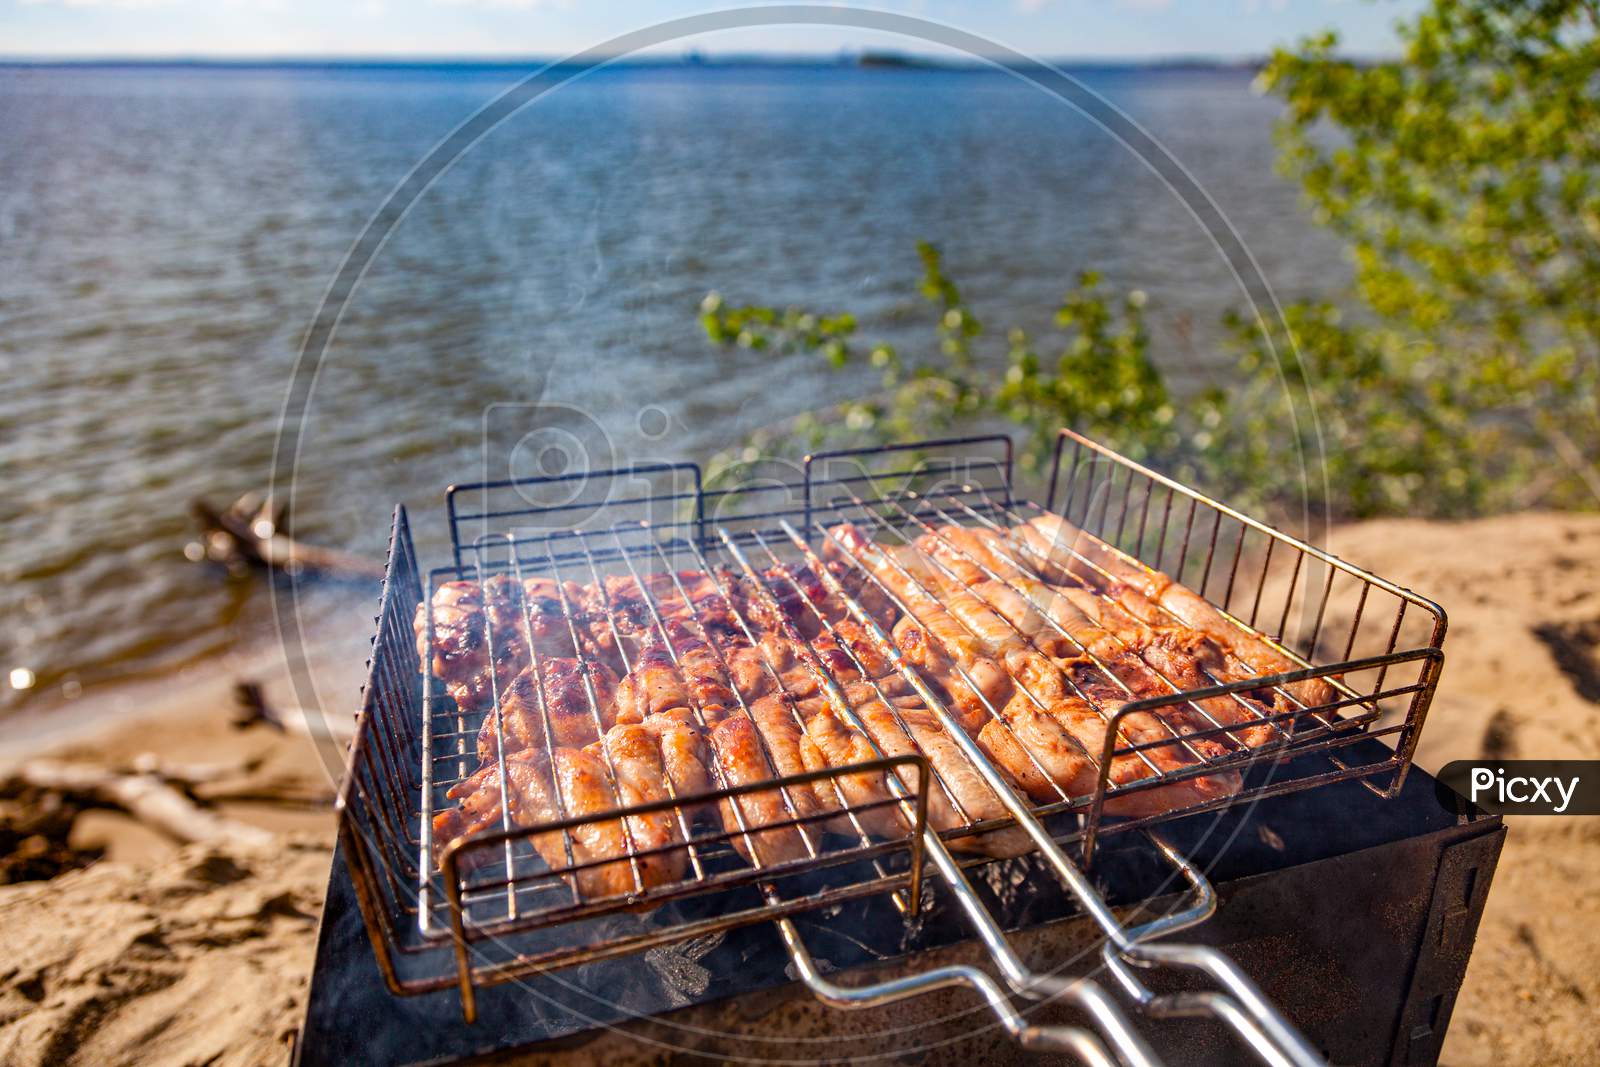 Chiken On The Grill Against The Background Of The Sea And The Beach- Paleo Food Photography.Delicious Chiken Steak, Hot Barbecue Grill.Roasted Chiken Leg Grilled, Bbq. Barbecue, Picnic In Nature